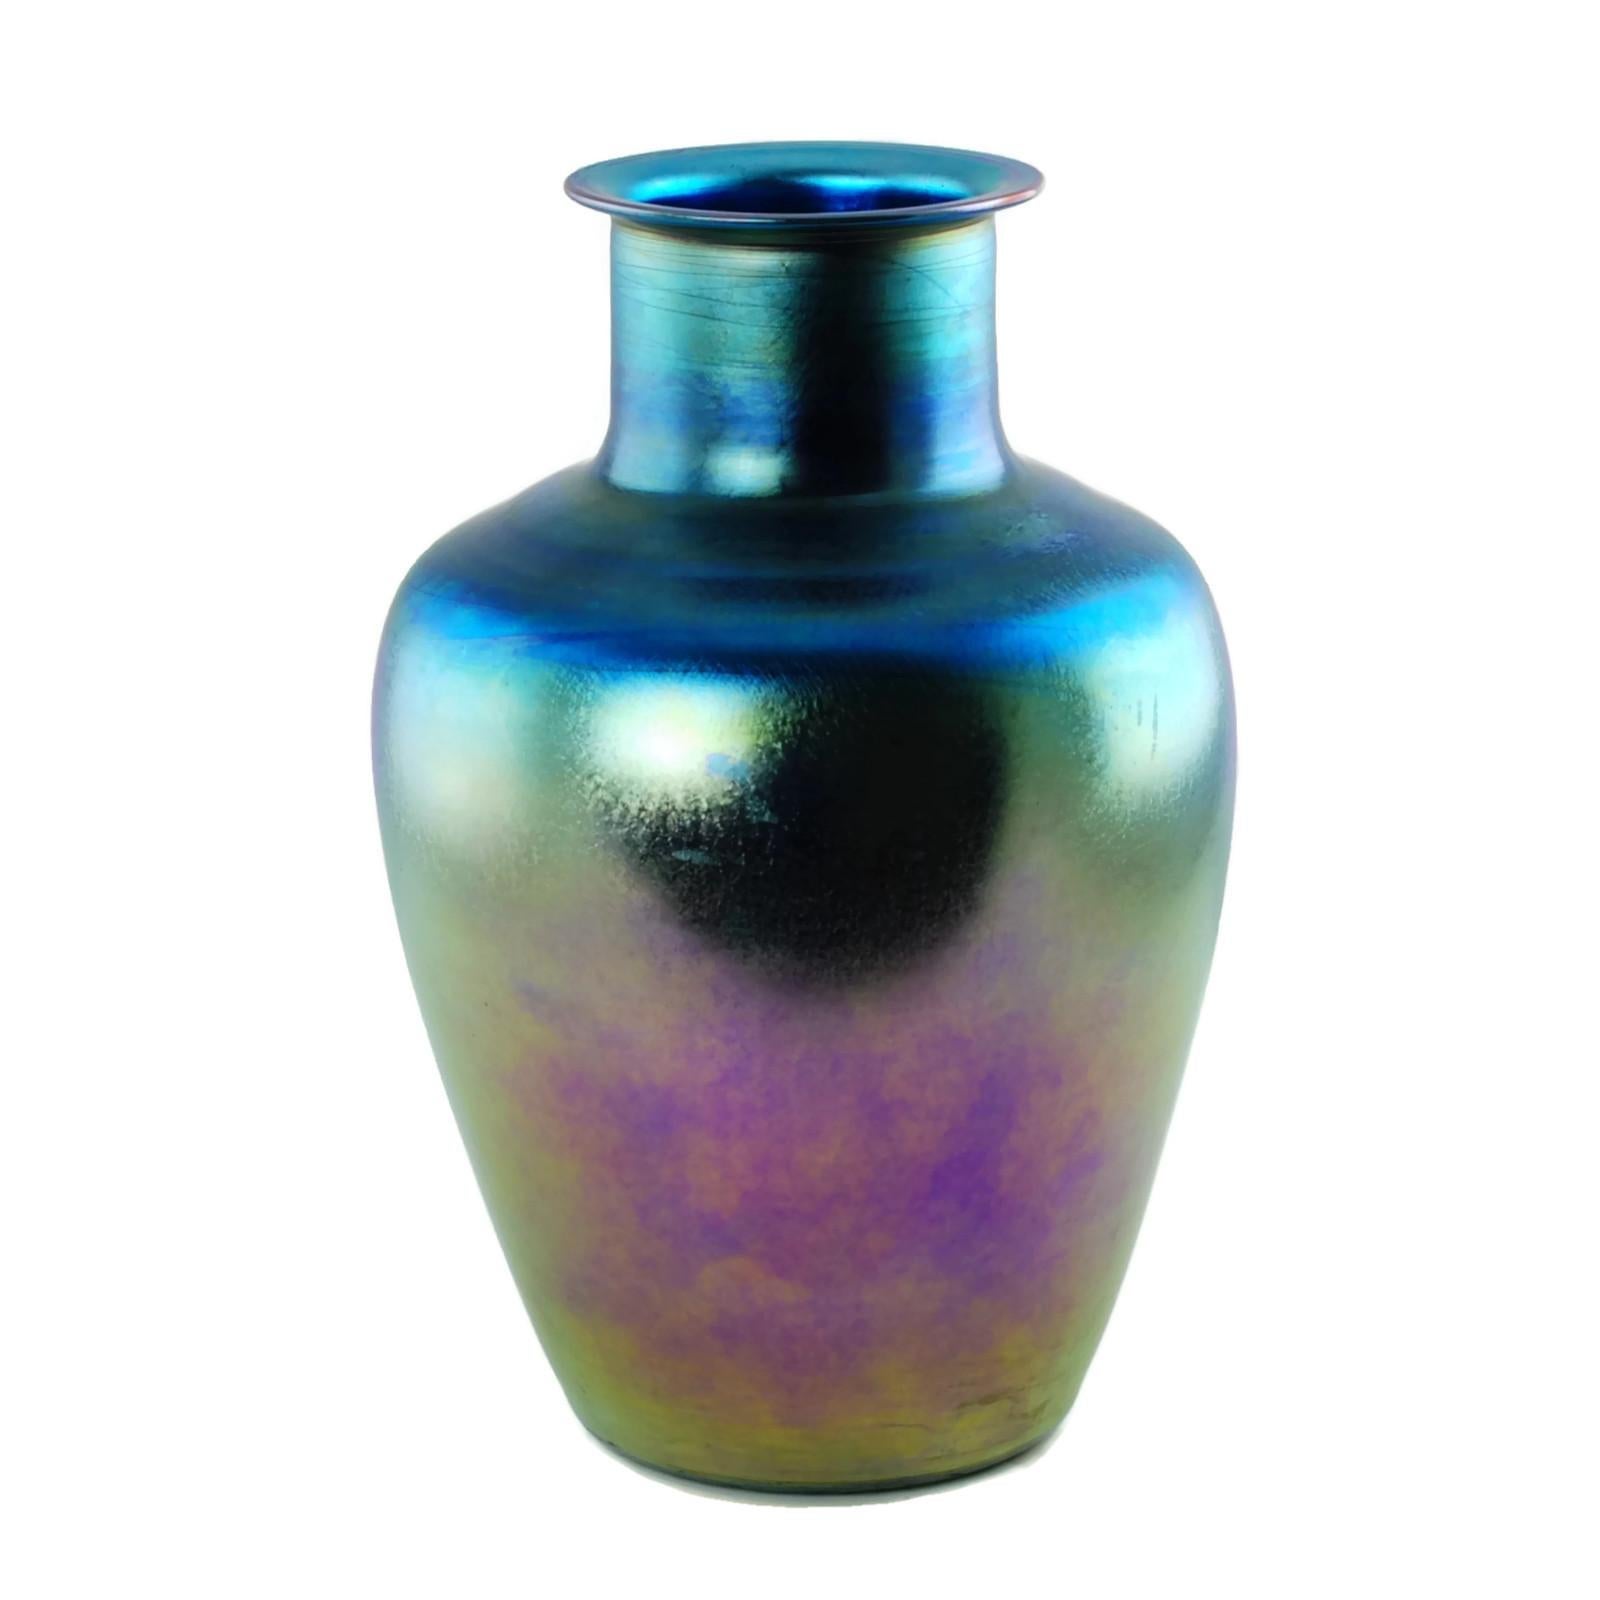 This early 20th century signed and numbered Favrile art glass vase was made by Tiffany Furnaces. The 12